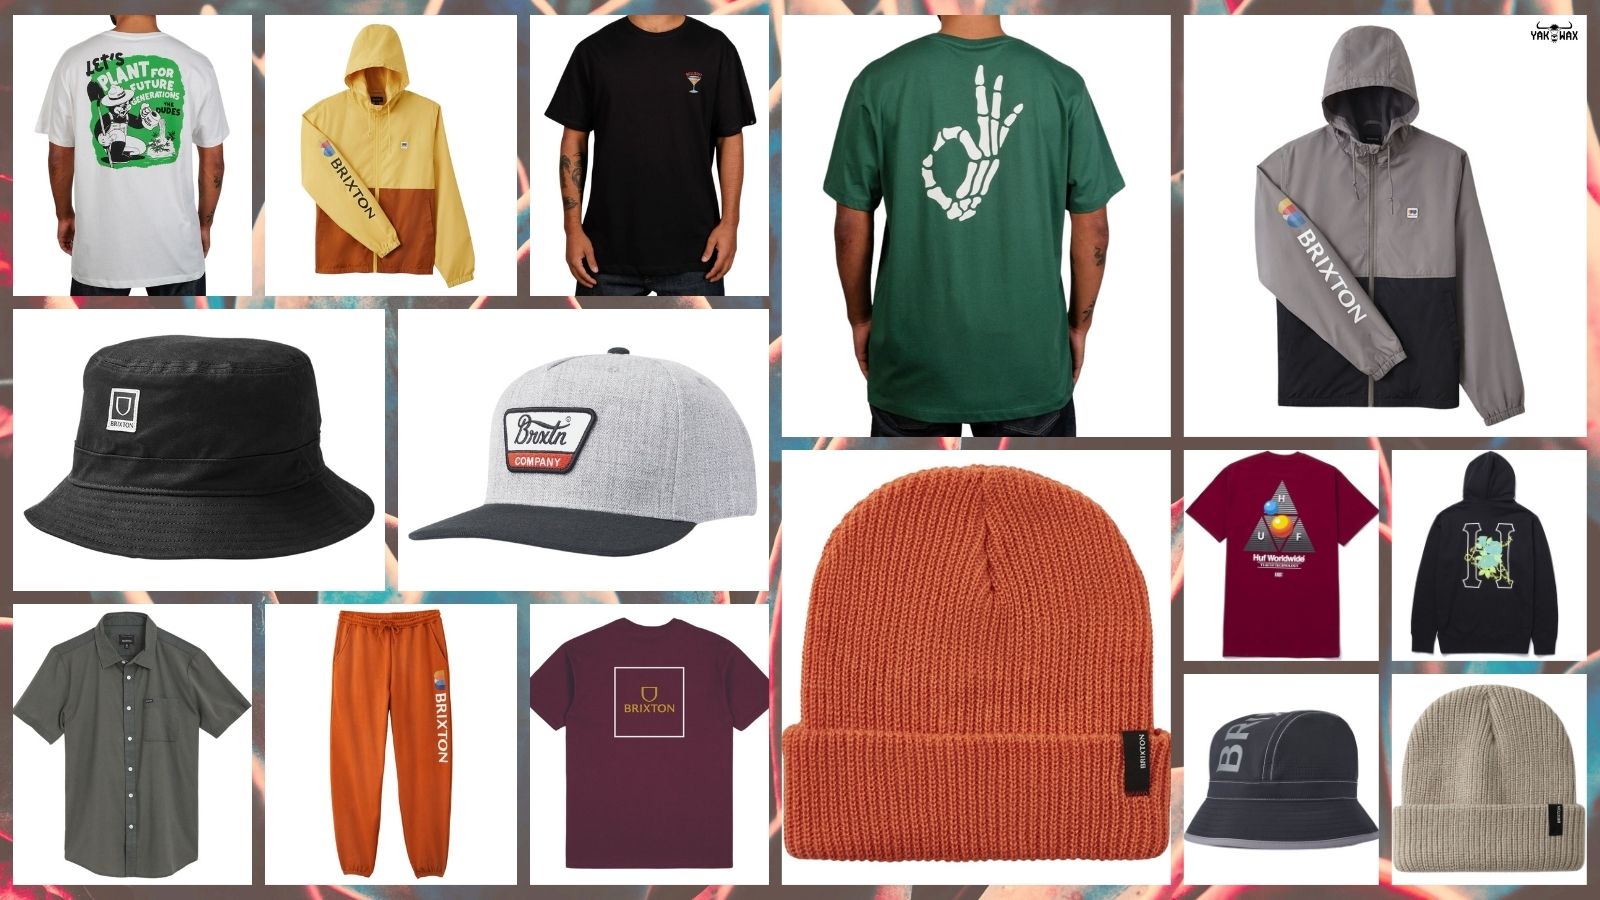 Skate-Surf-Apparel-Accessories-Huf-TheDudesFactory-Brixton-Fall-2021